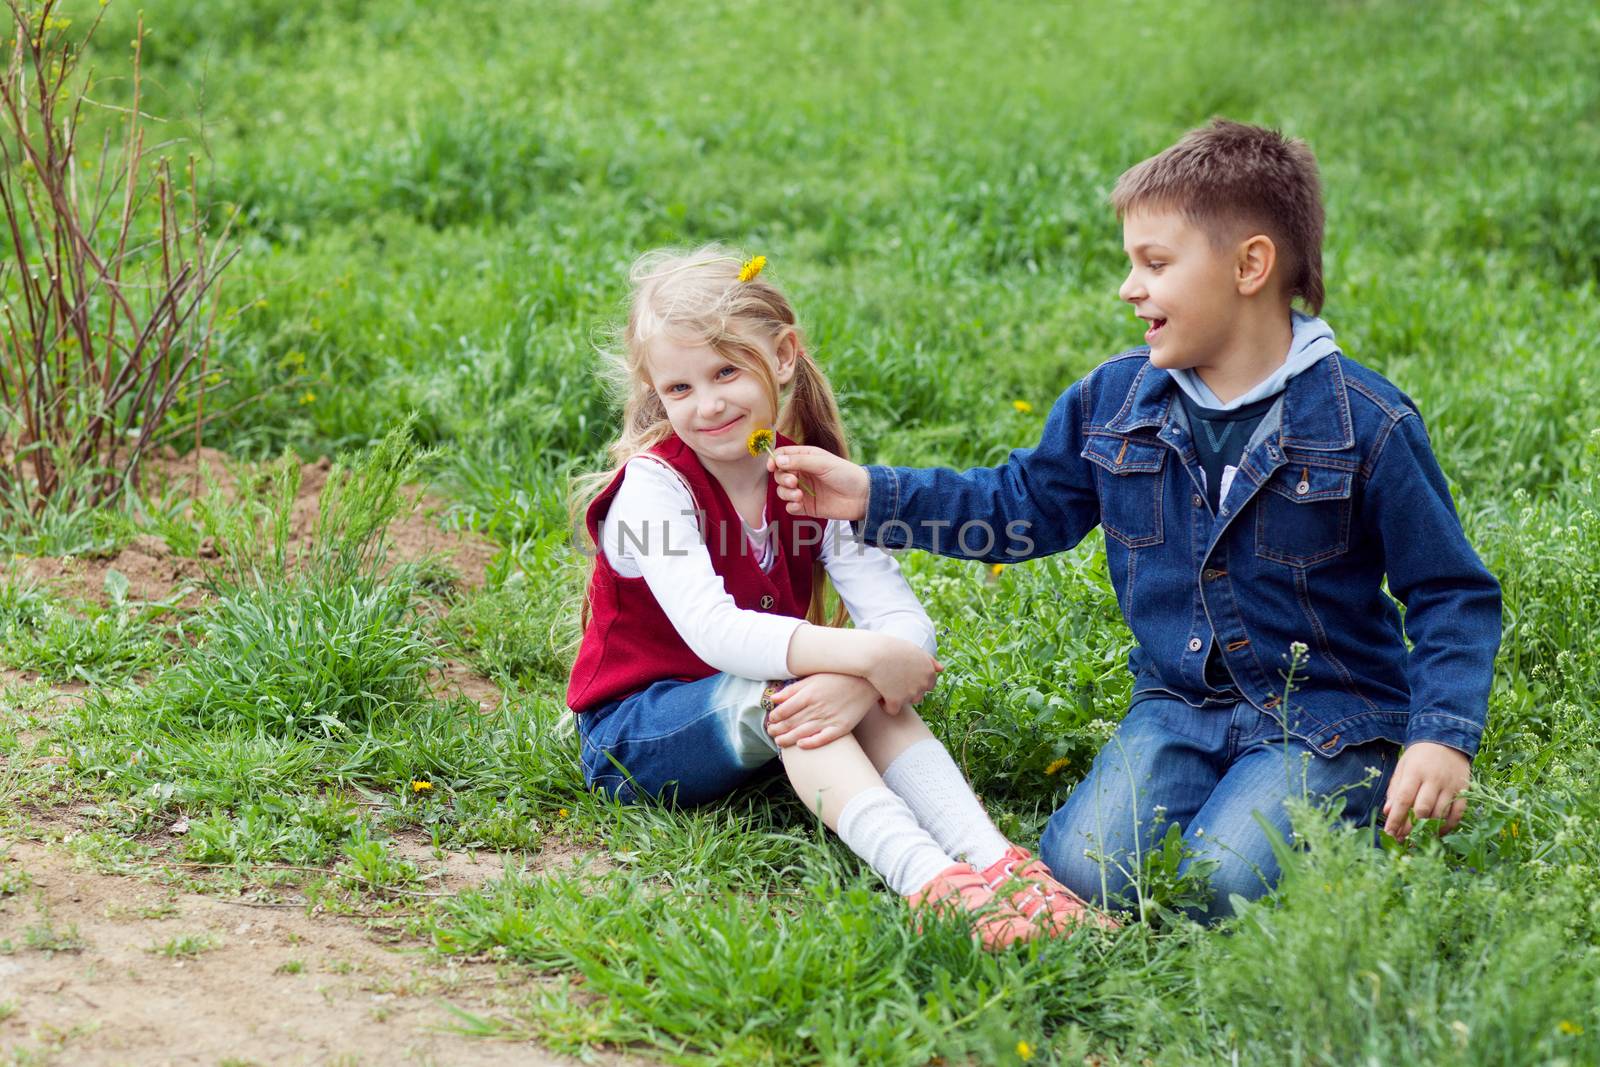 boy giving flowers to girl